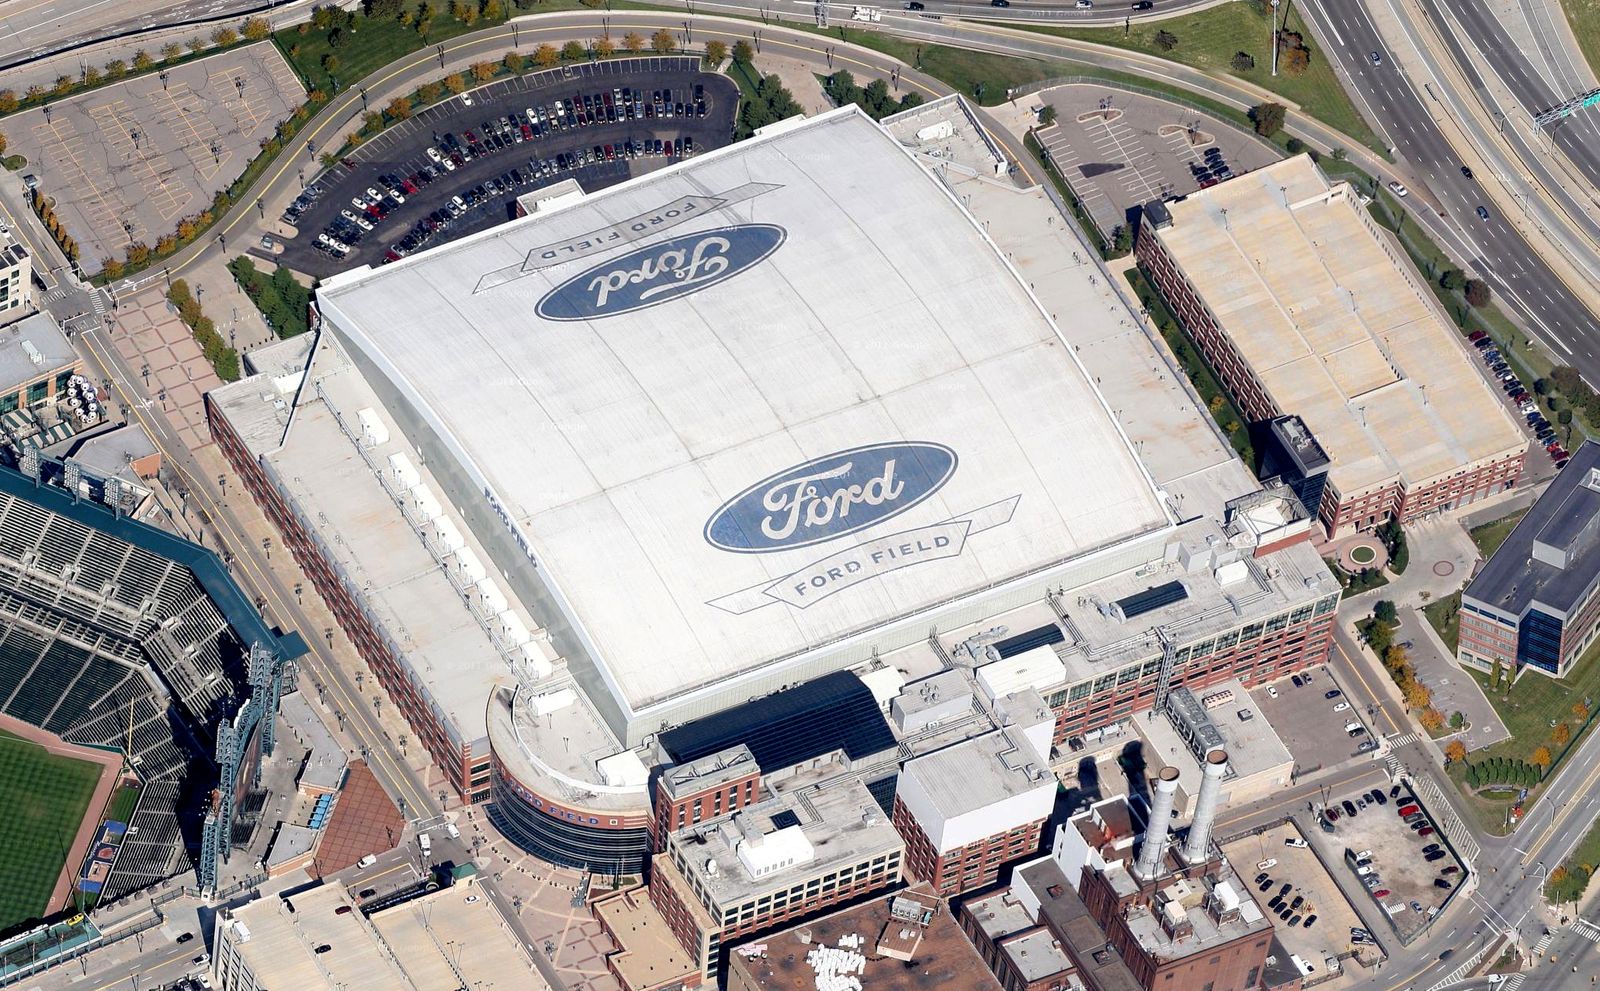 Ford field images